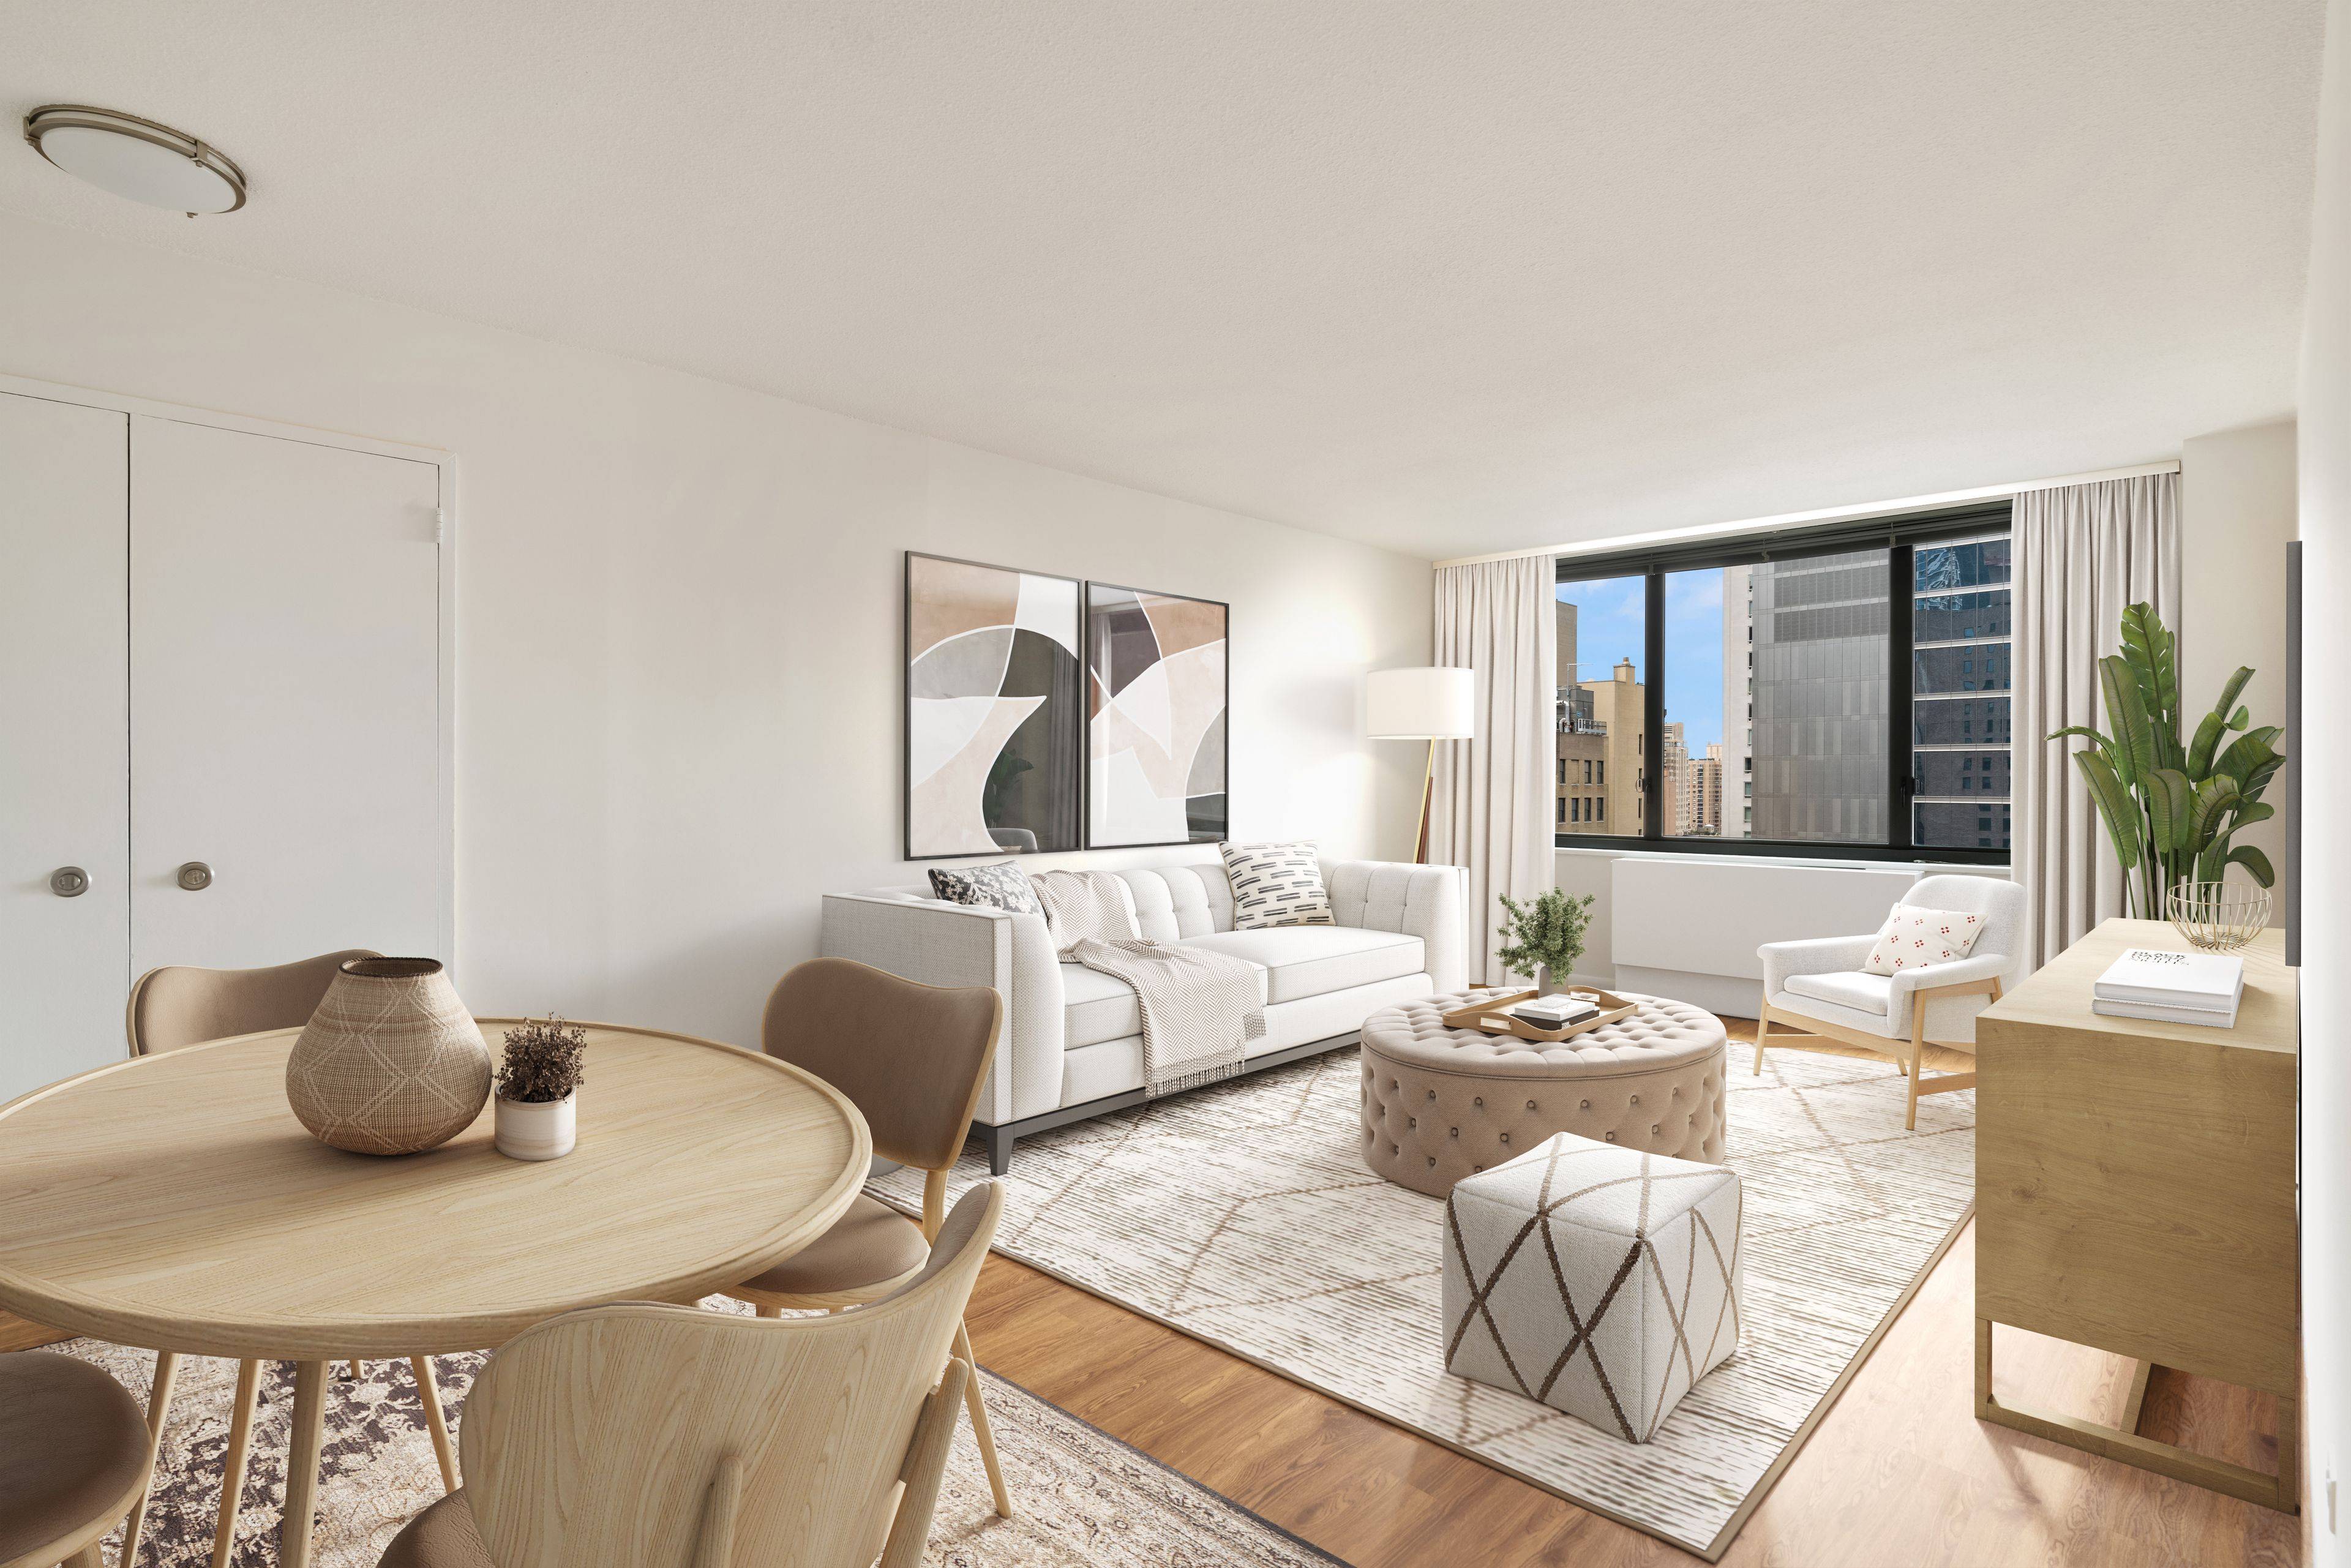 Located at 211 West 56th Street, Carnegie Mews is in the center of New York's premiere neighborhood for entertainment and the Arts just steps from Carnegie Hall, Lincoln Center, the ...